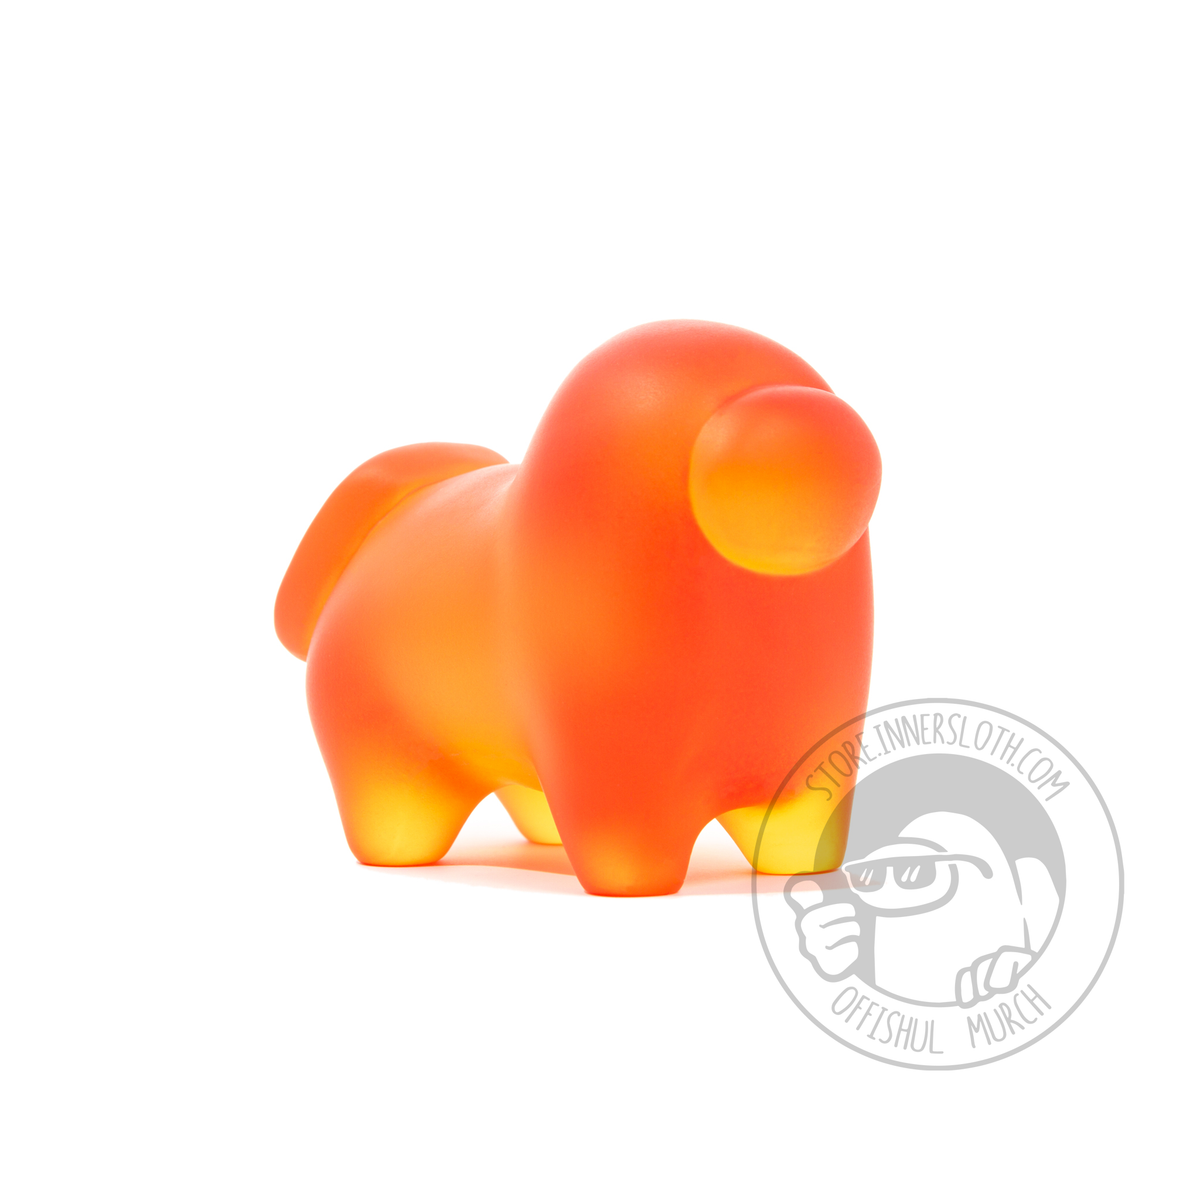 A photographed 3/4 of a Horse-shaped Crewmate figurine made of translucent Orange resin.